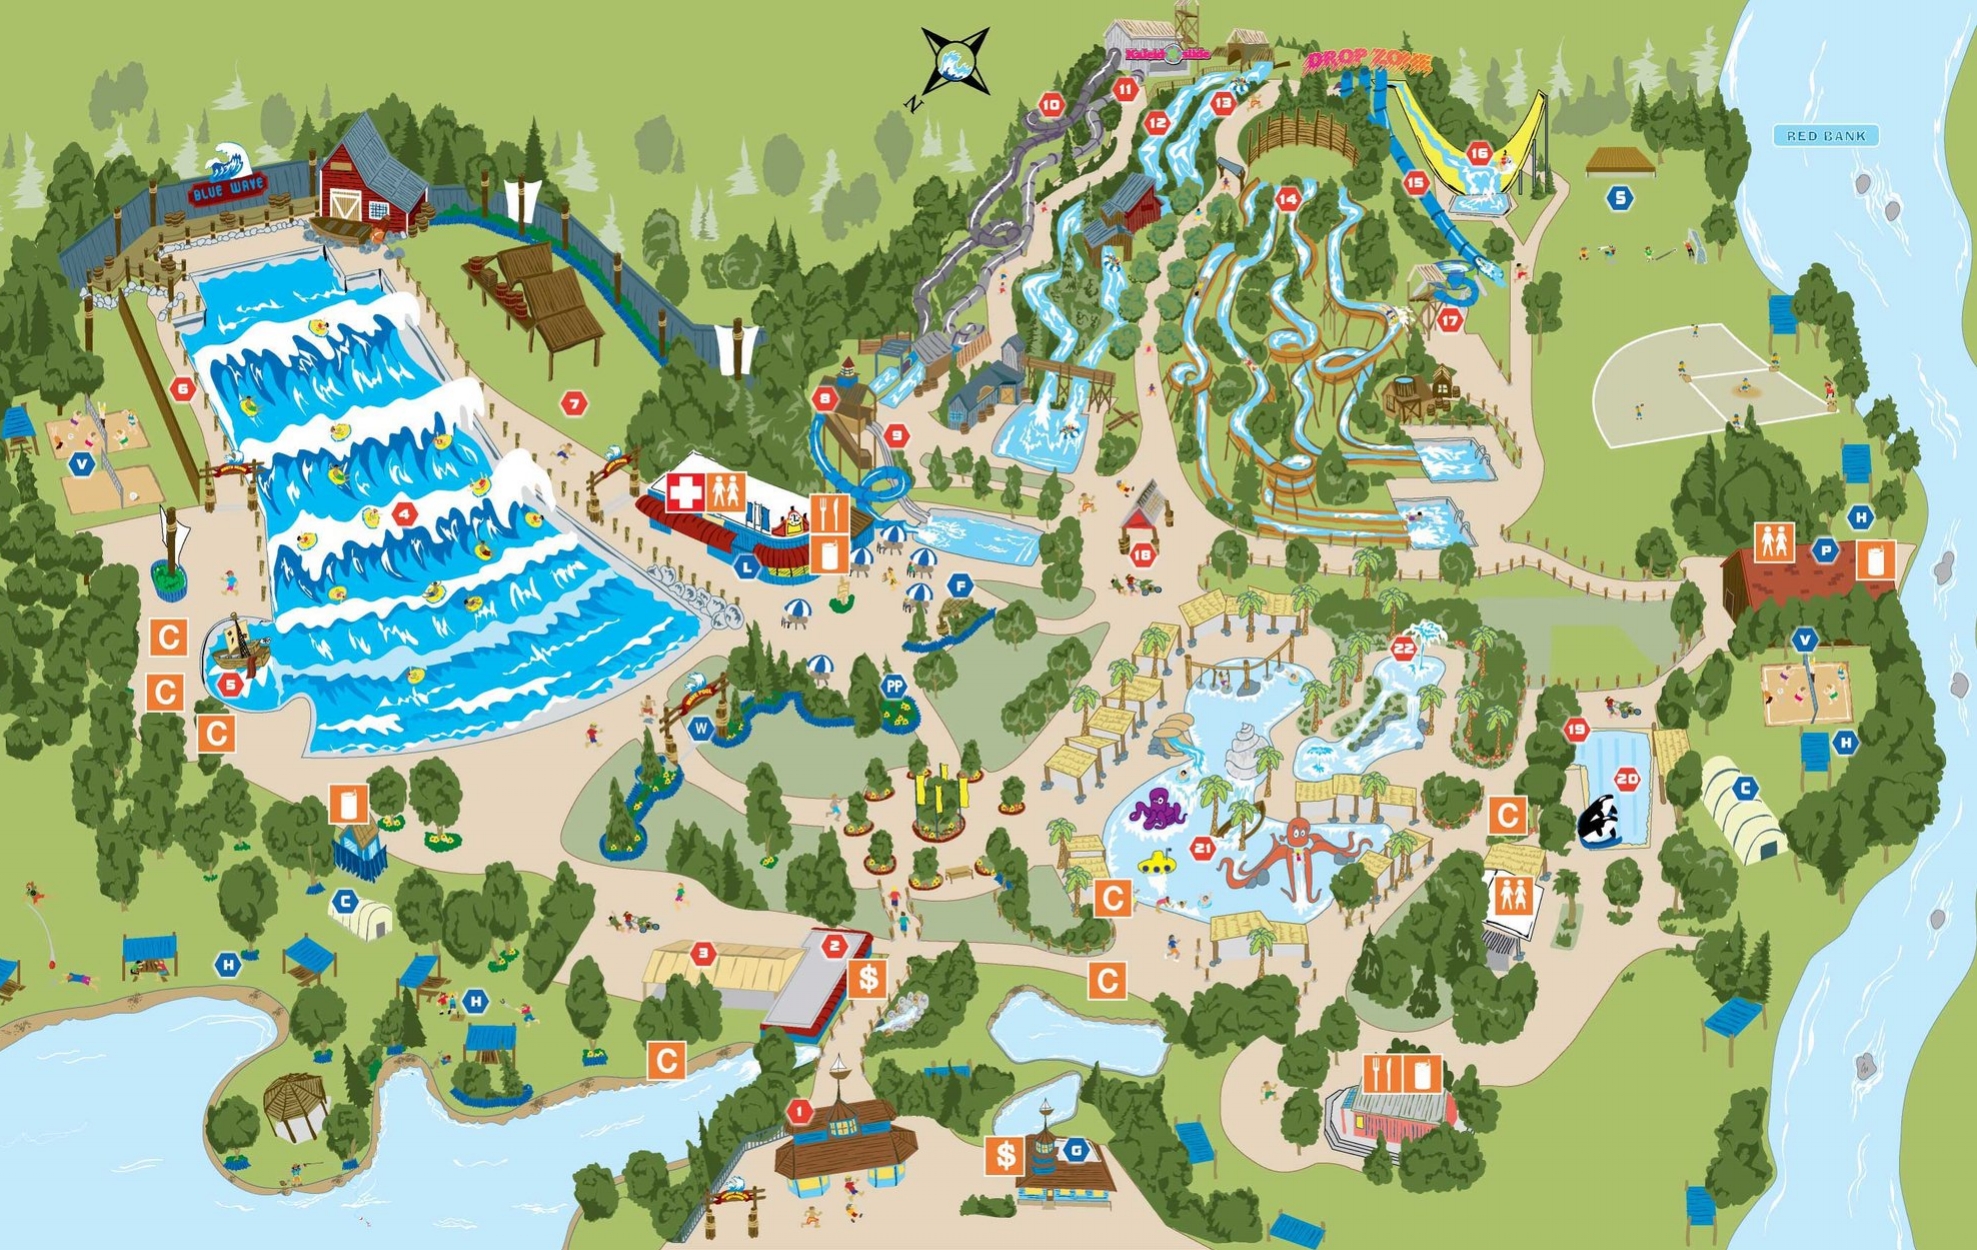 About the Park — Wild Water Adventure Park